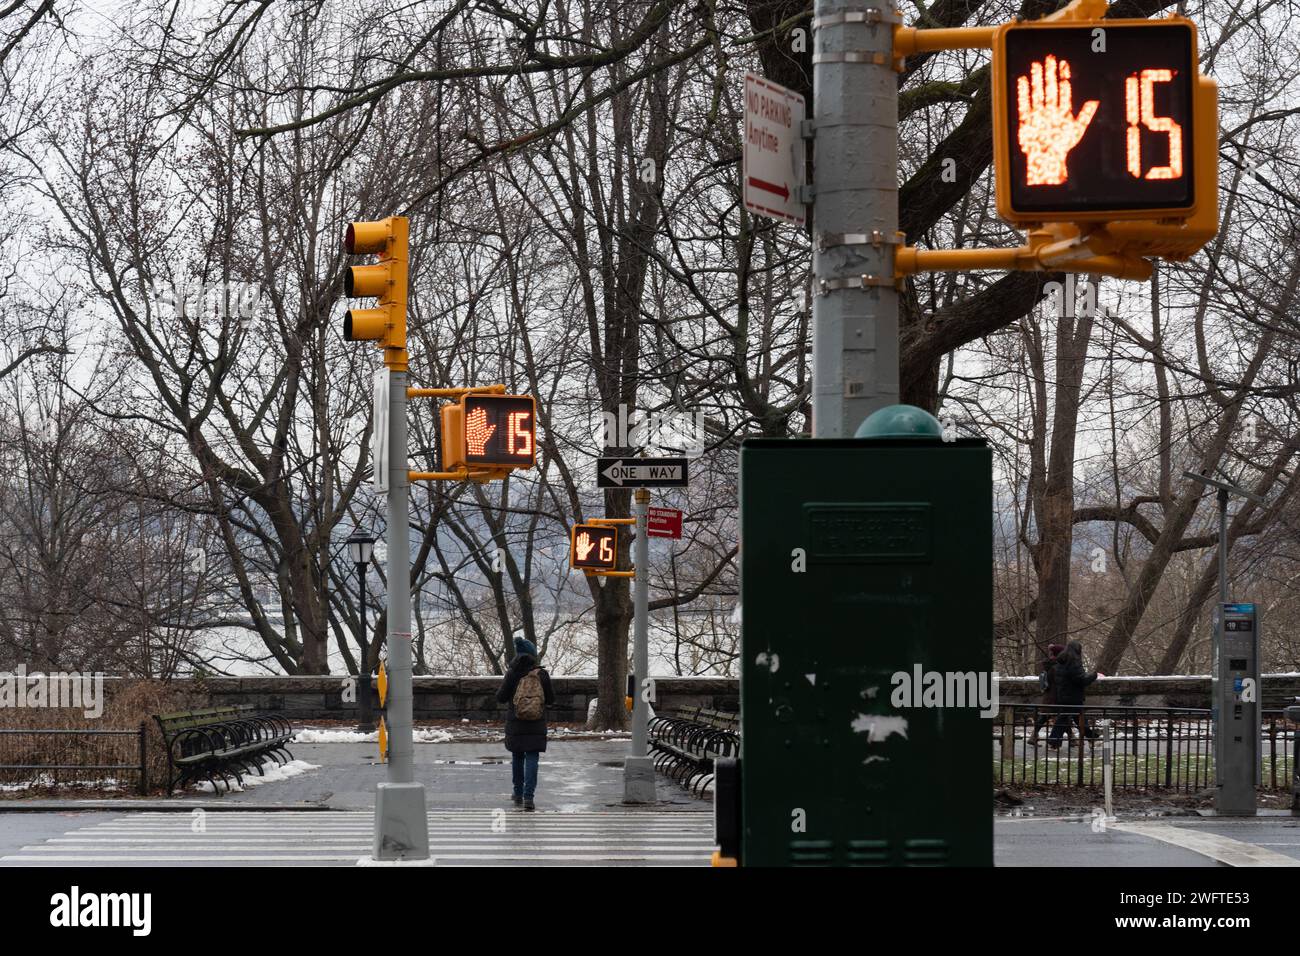 A pedestrian crossing near the Riverside park on the Upper West Side of New York City. Photo date: Tuesday, January 23, 2024. Photo: Richard Gray/Alam Stock Photo